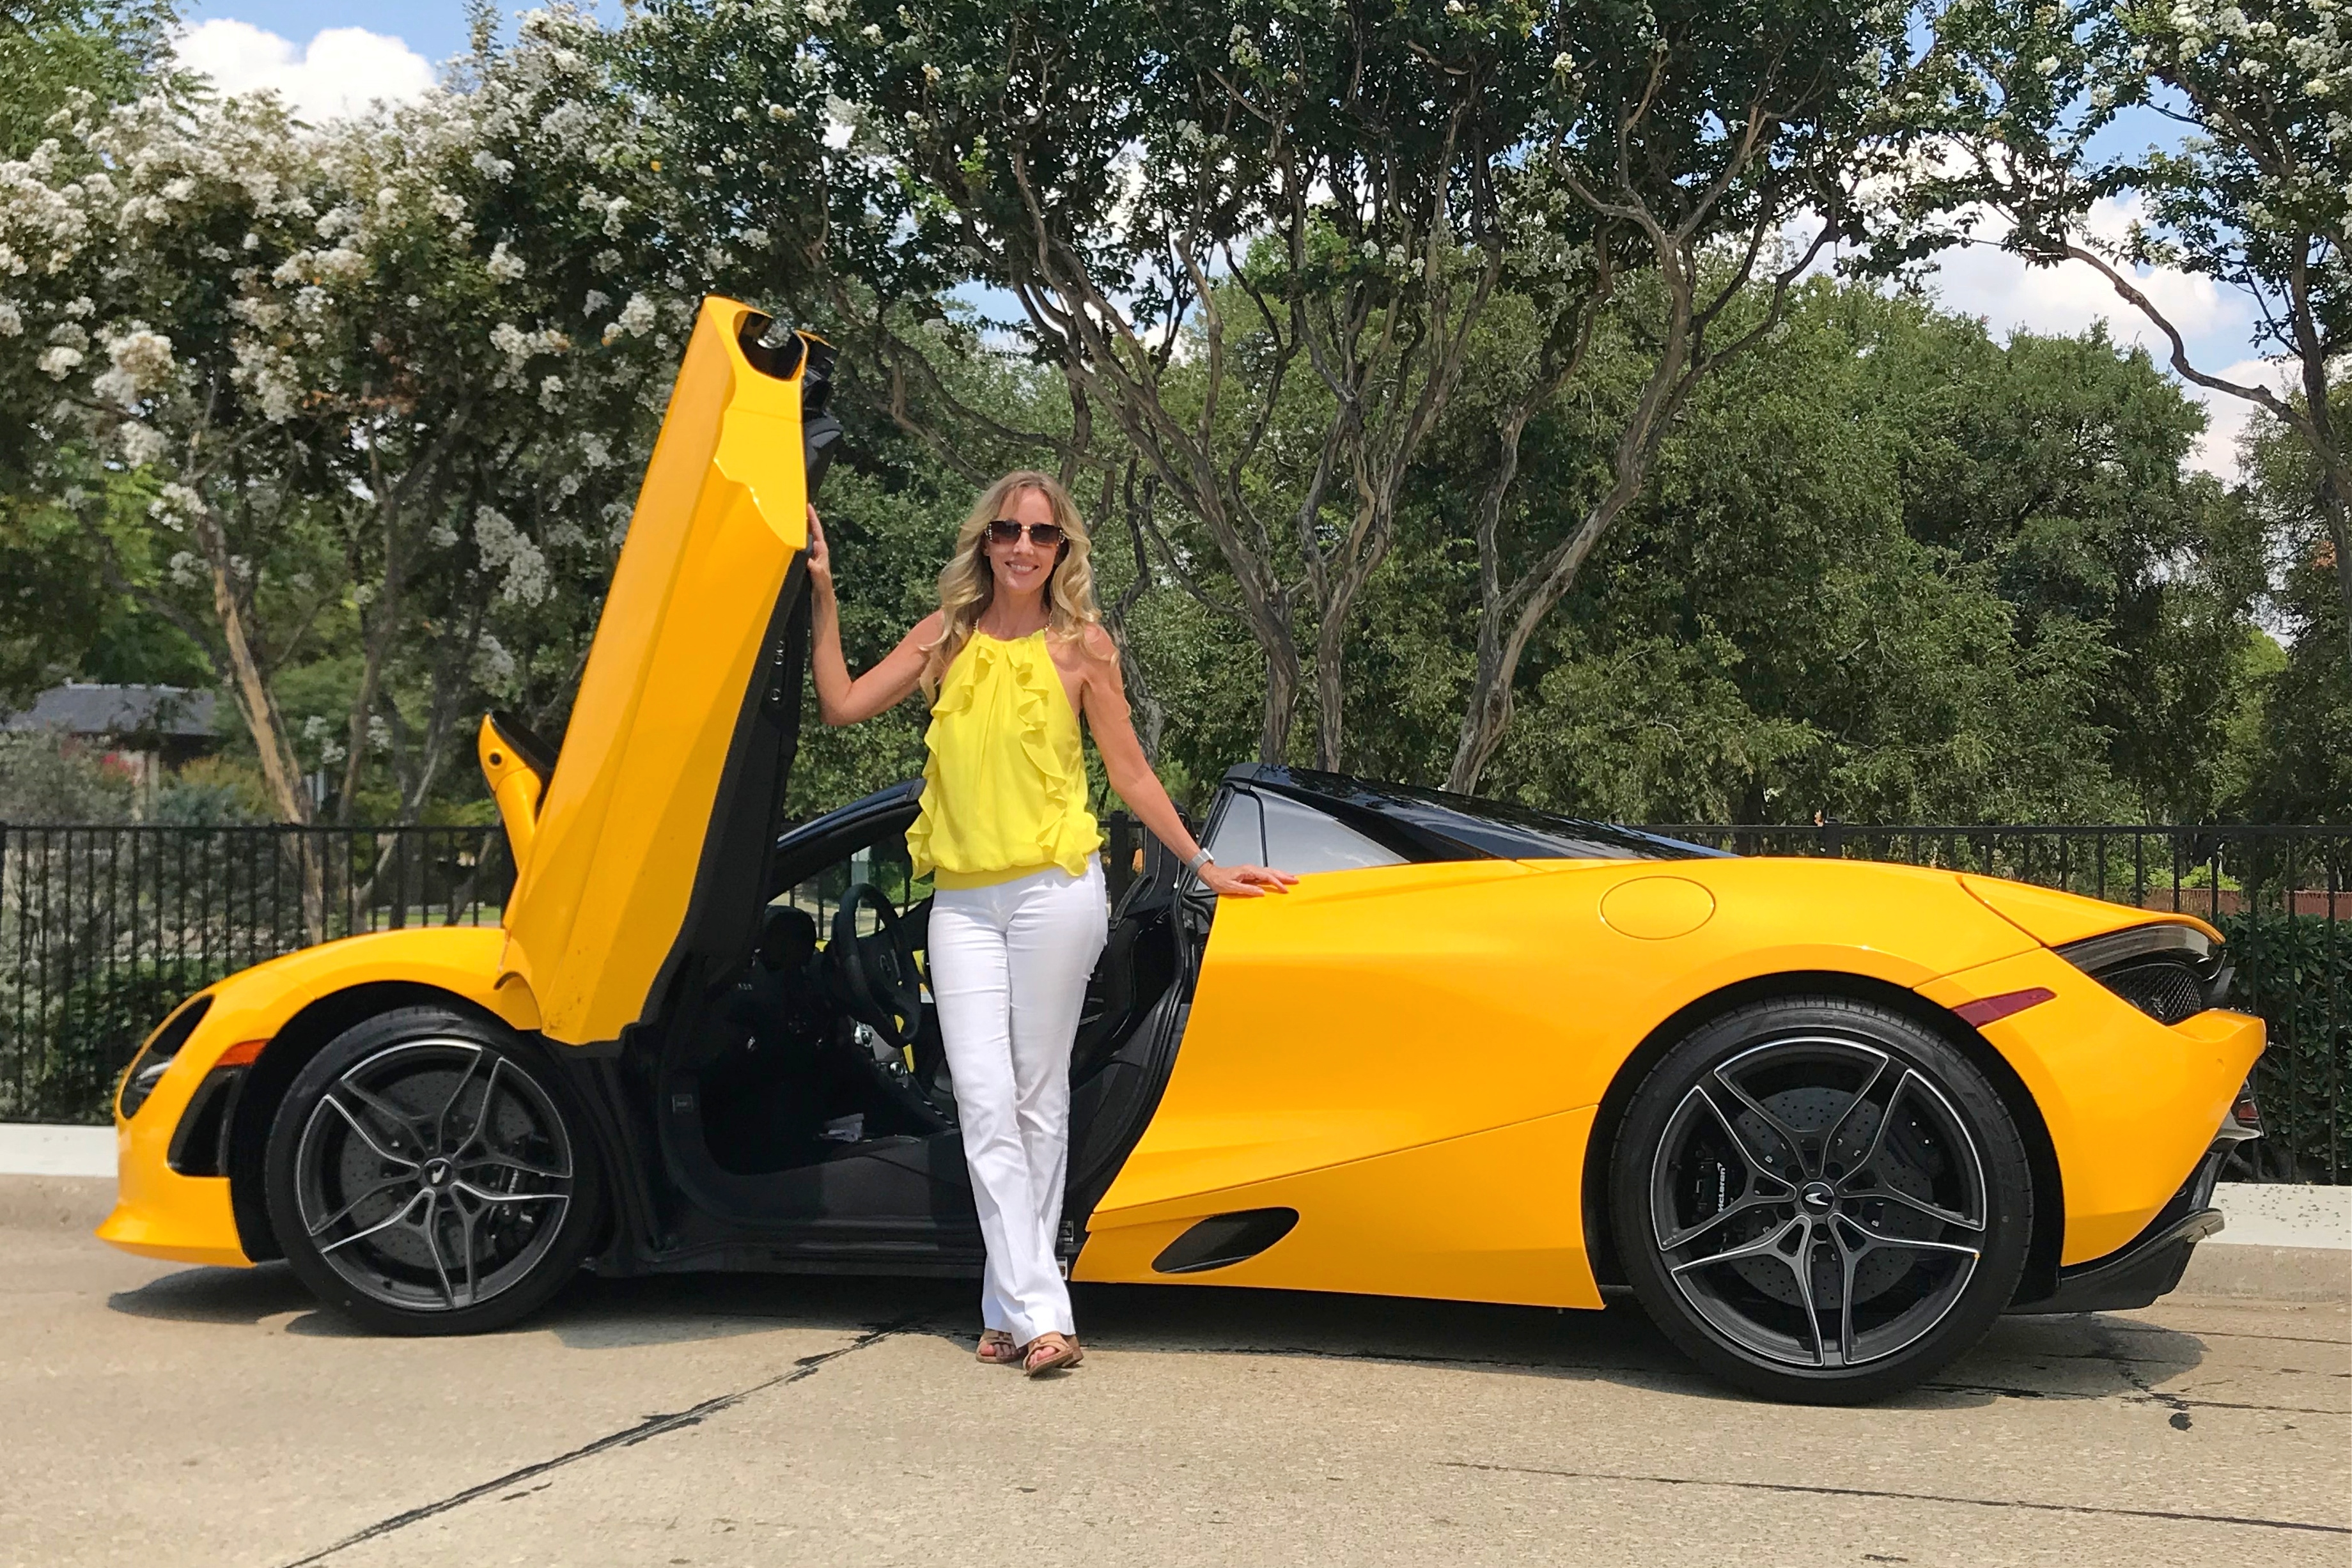 Motor Vehicles | Exotic Automobile Car Rental, Motorcycle Rentals, NASCAR Driving Experiences, Dream Car Tour Experiences | Life and Leisure | Austin, Texas, USA